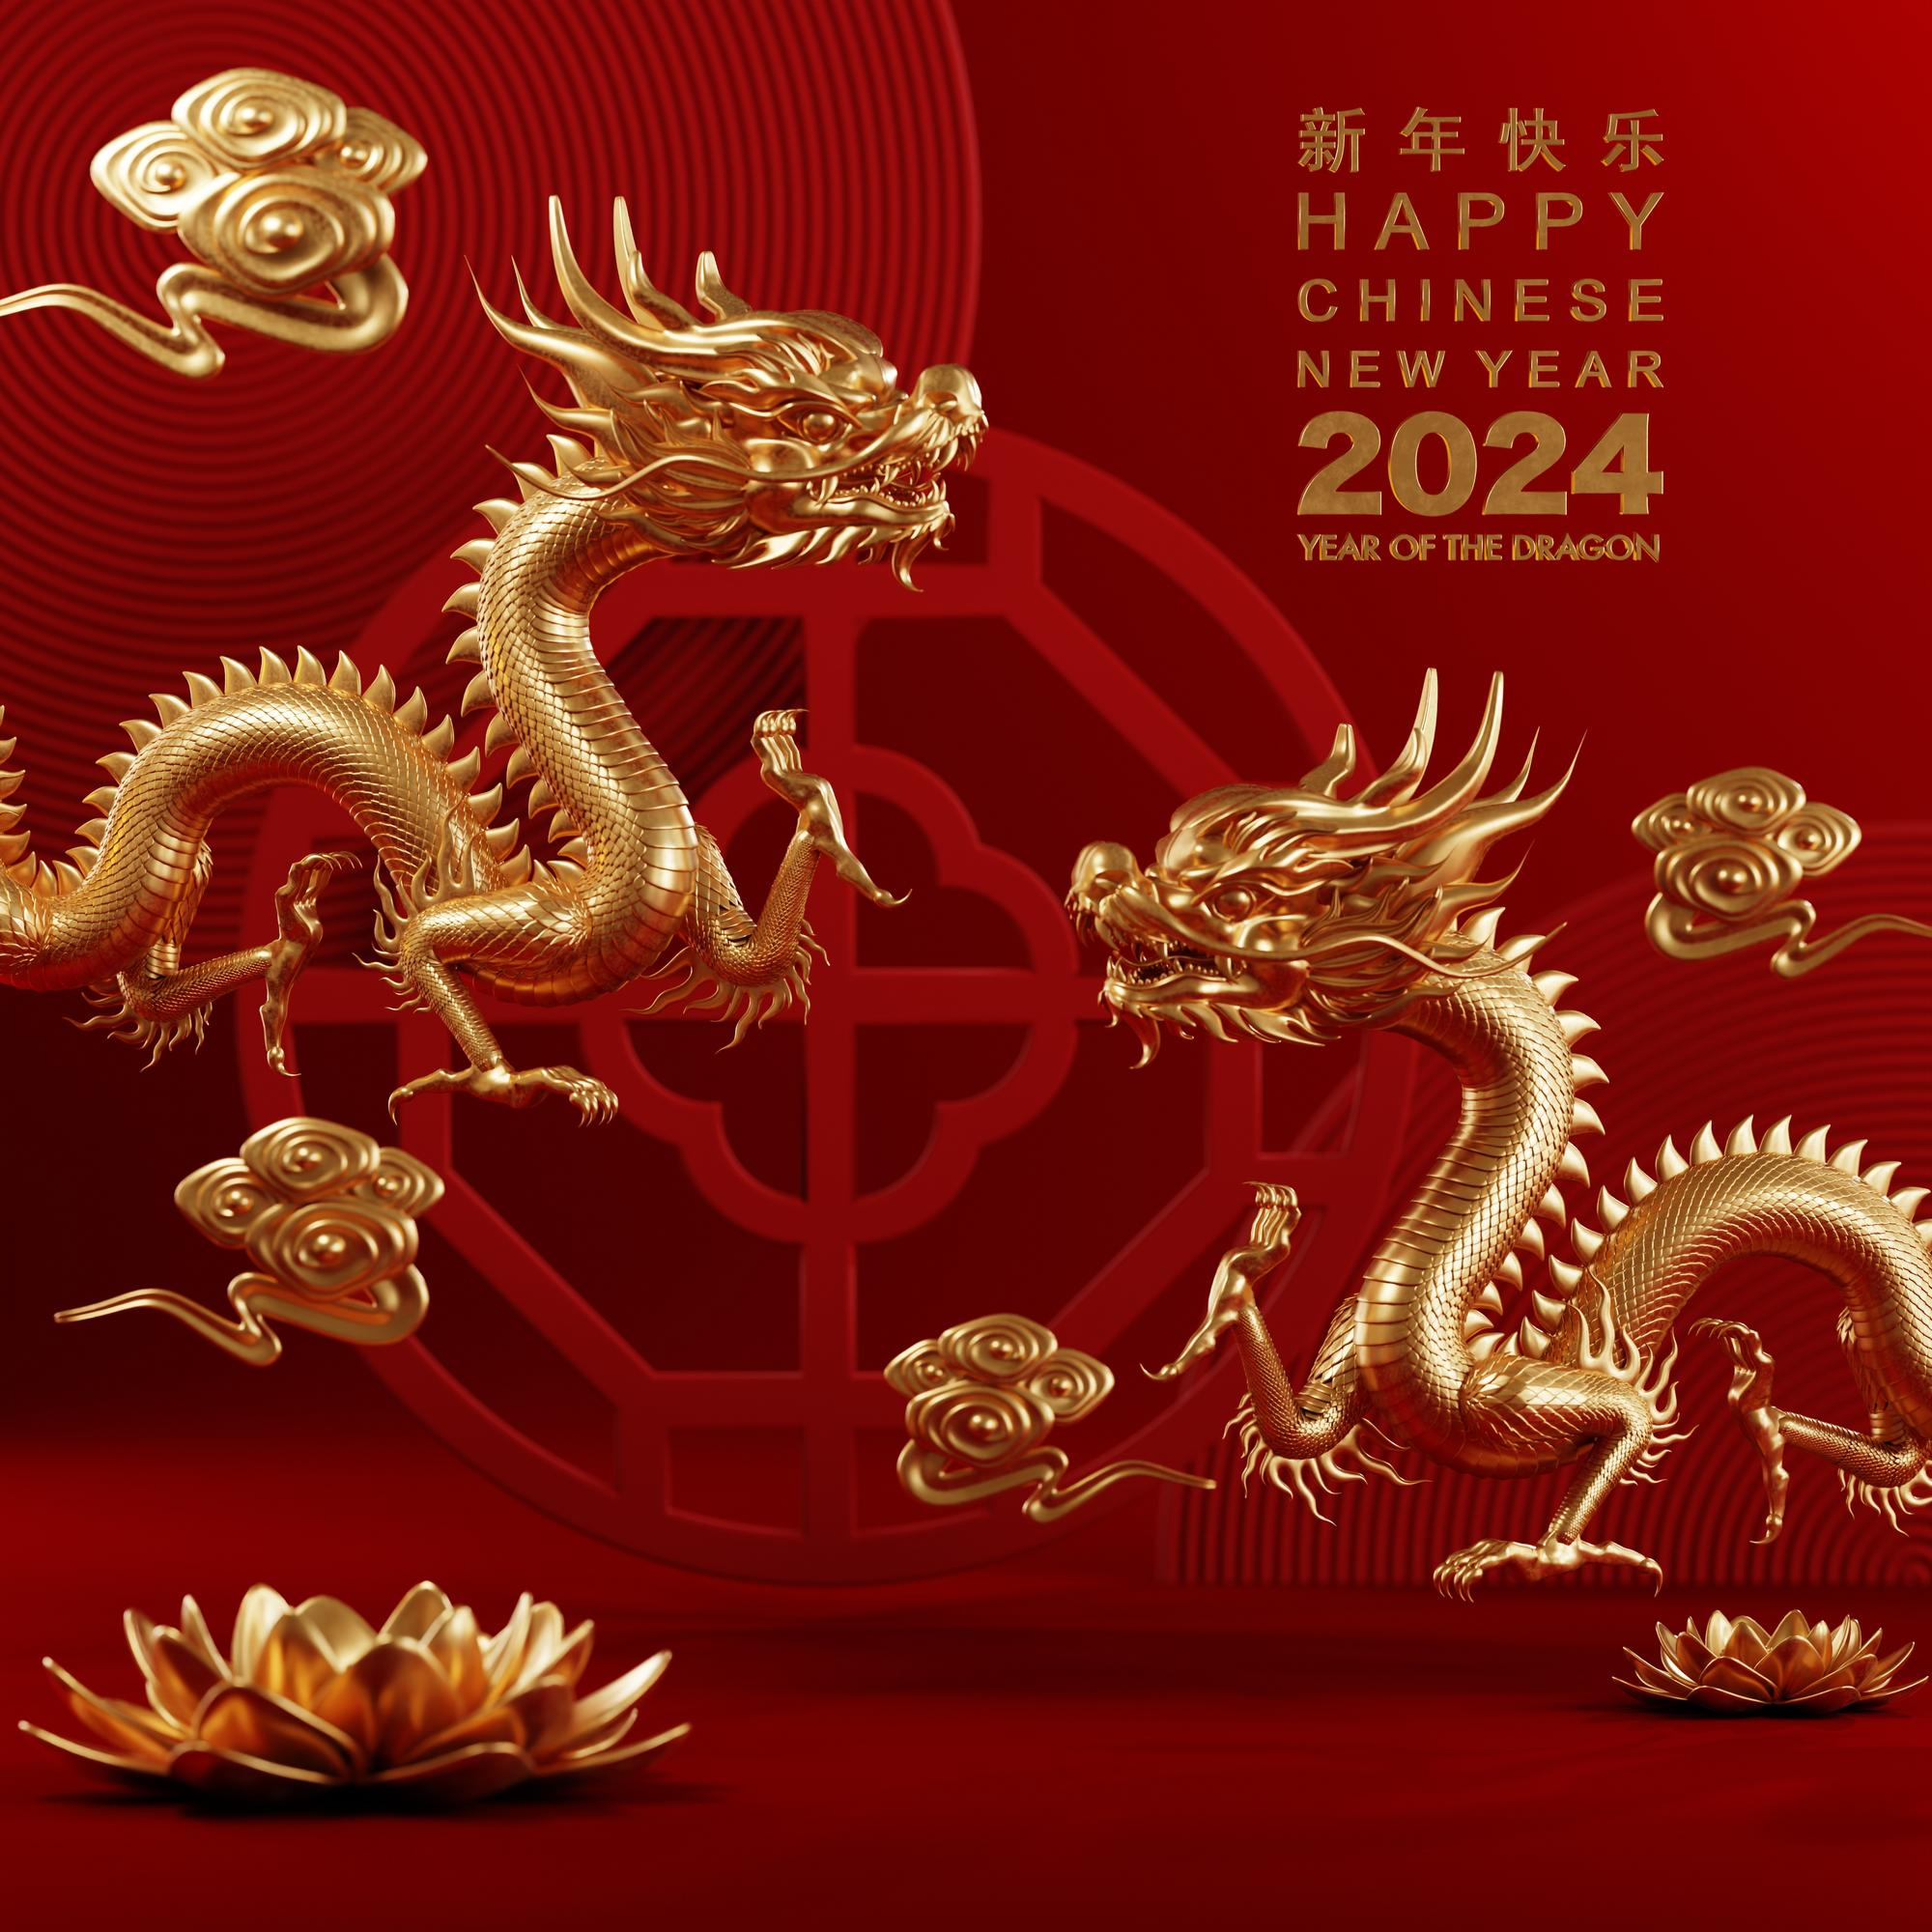 Chinese New Year dragon zodiac with "Happy Chinese New Year 2024"